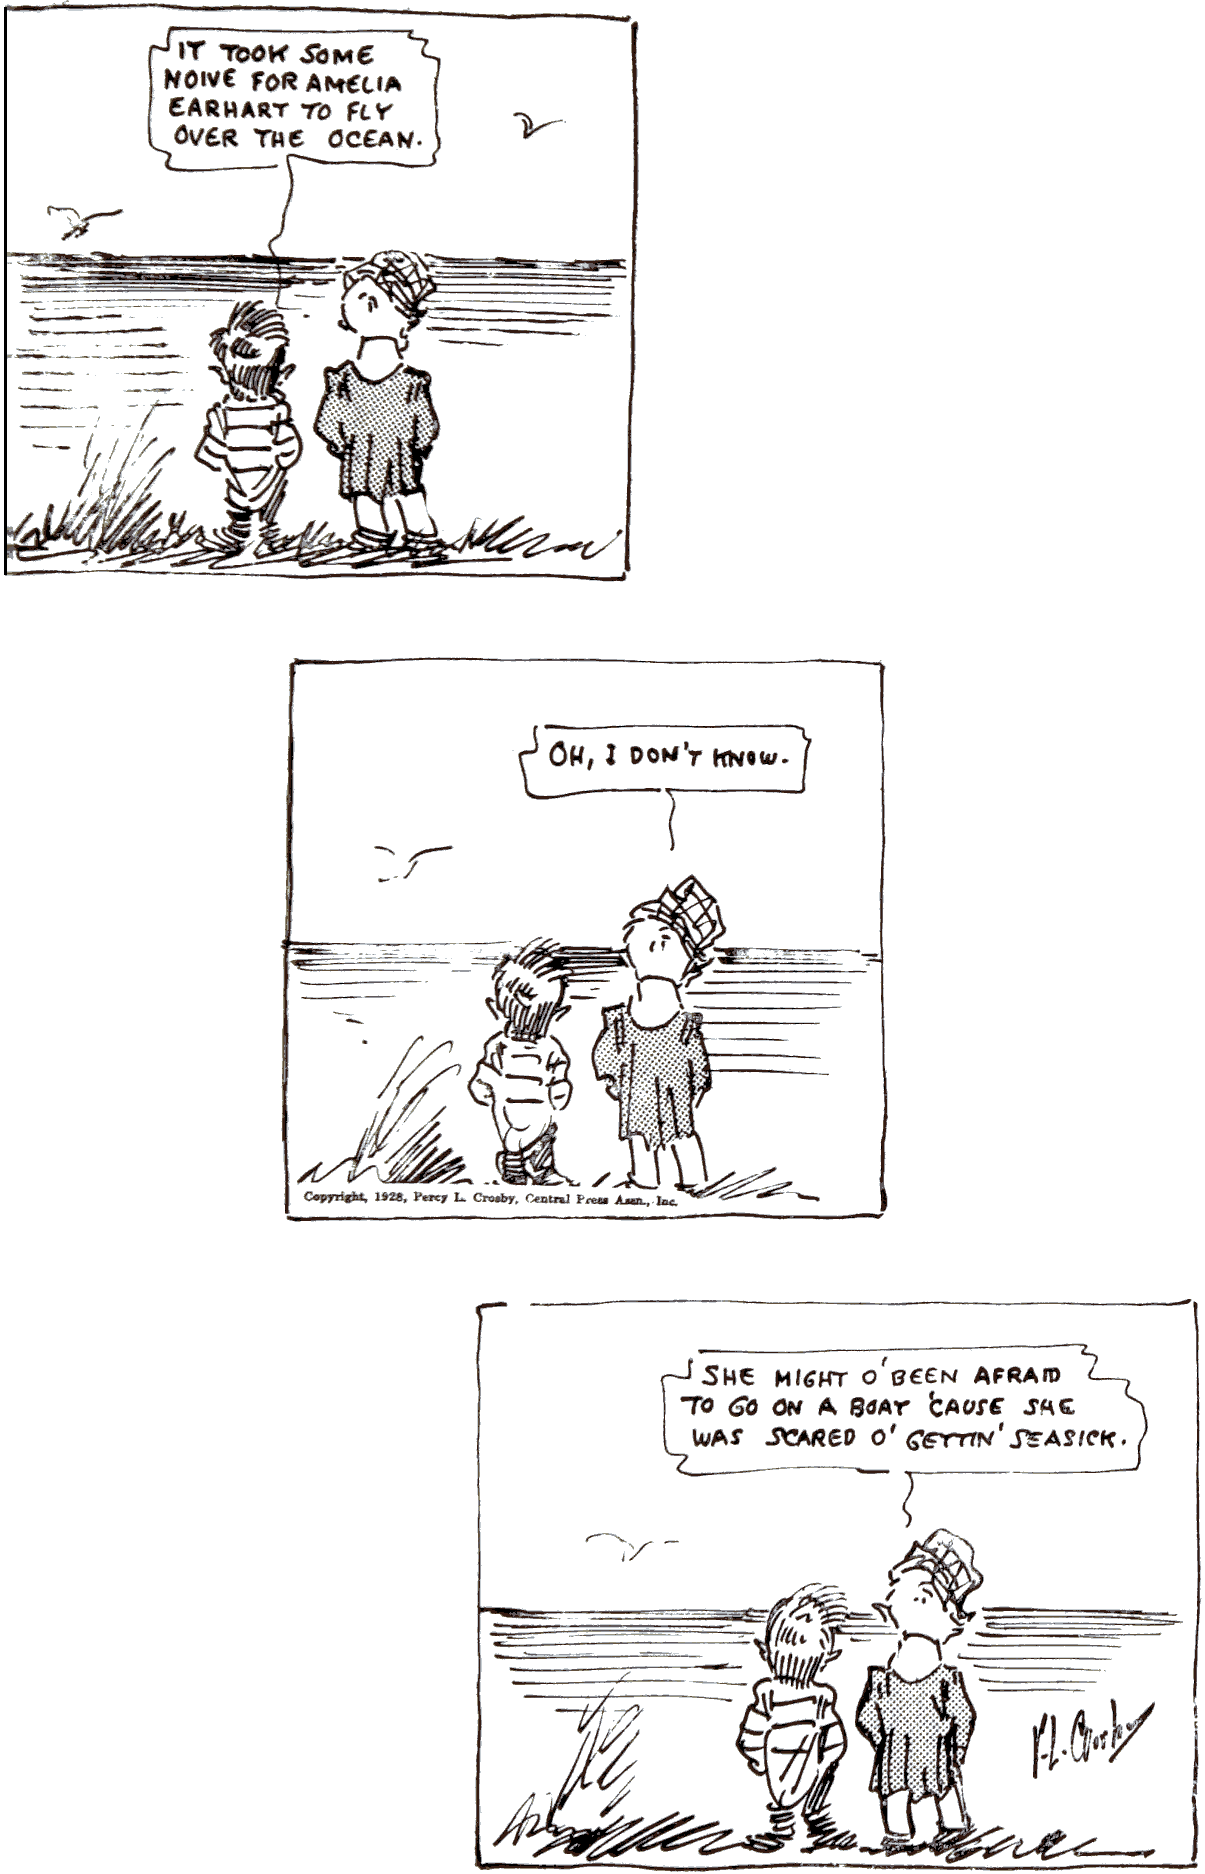 Drawing 3 vertical panel comic of 2 boys gazing out at ocean